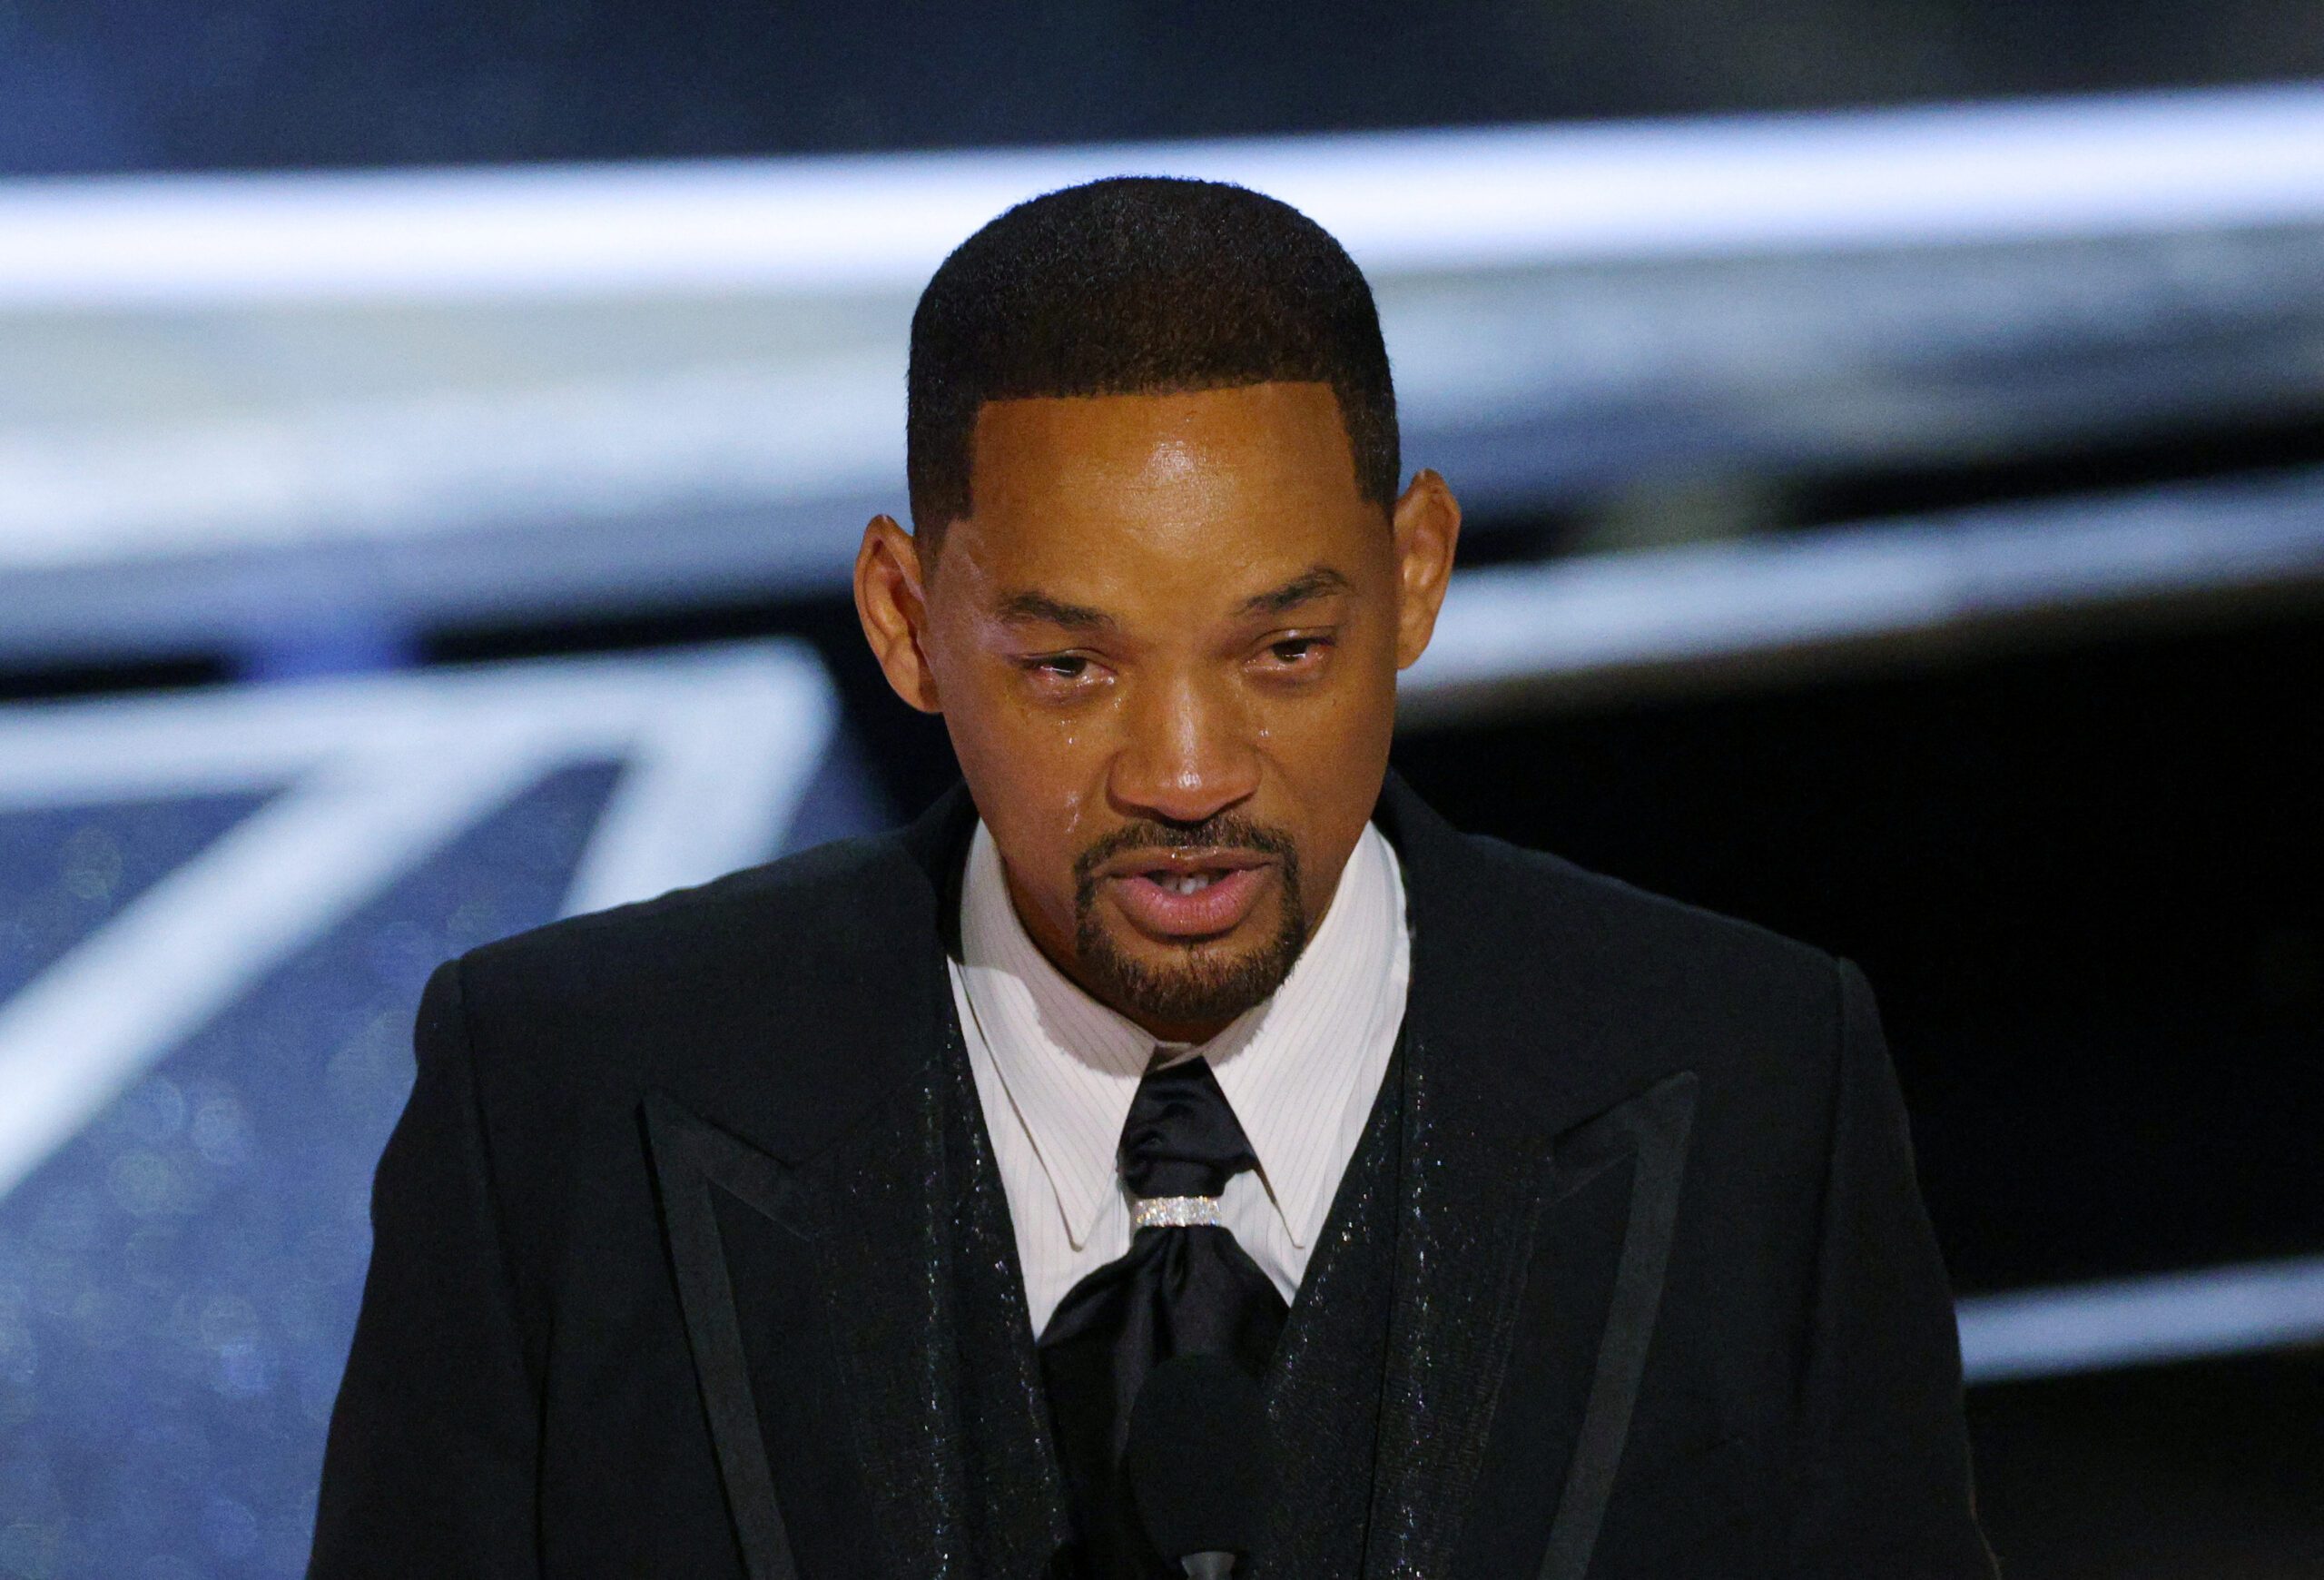 Film academy response to Will Smith slap was ‘inadequate,’ group’s president says